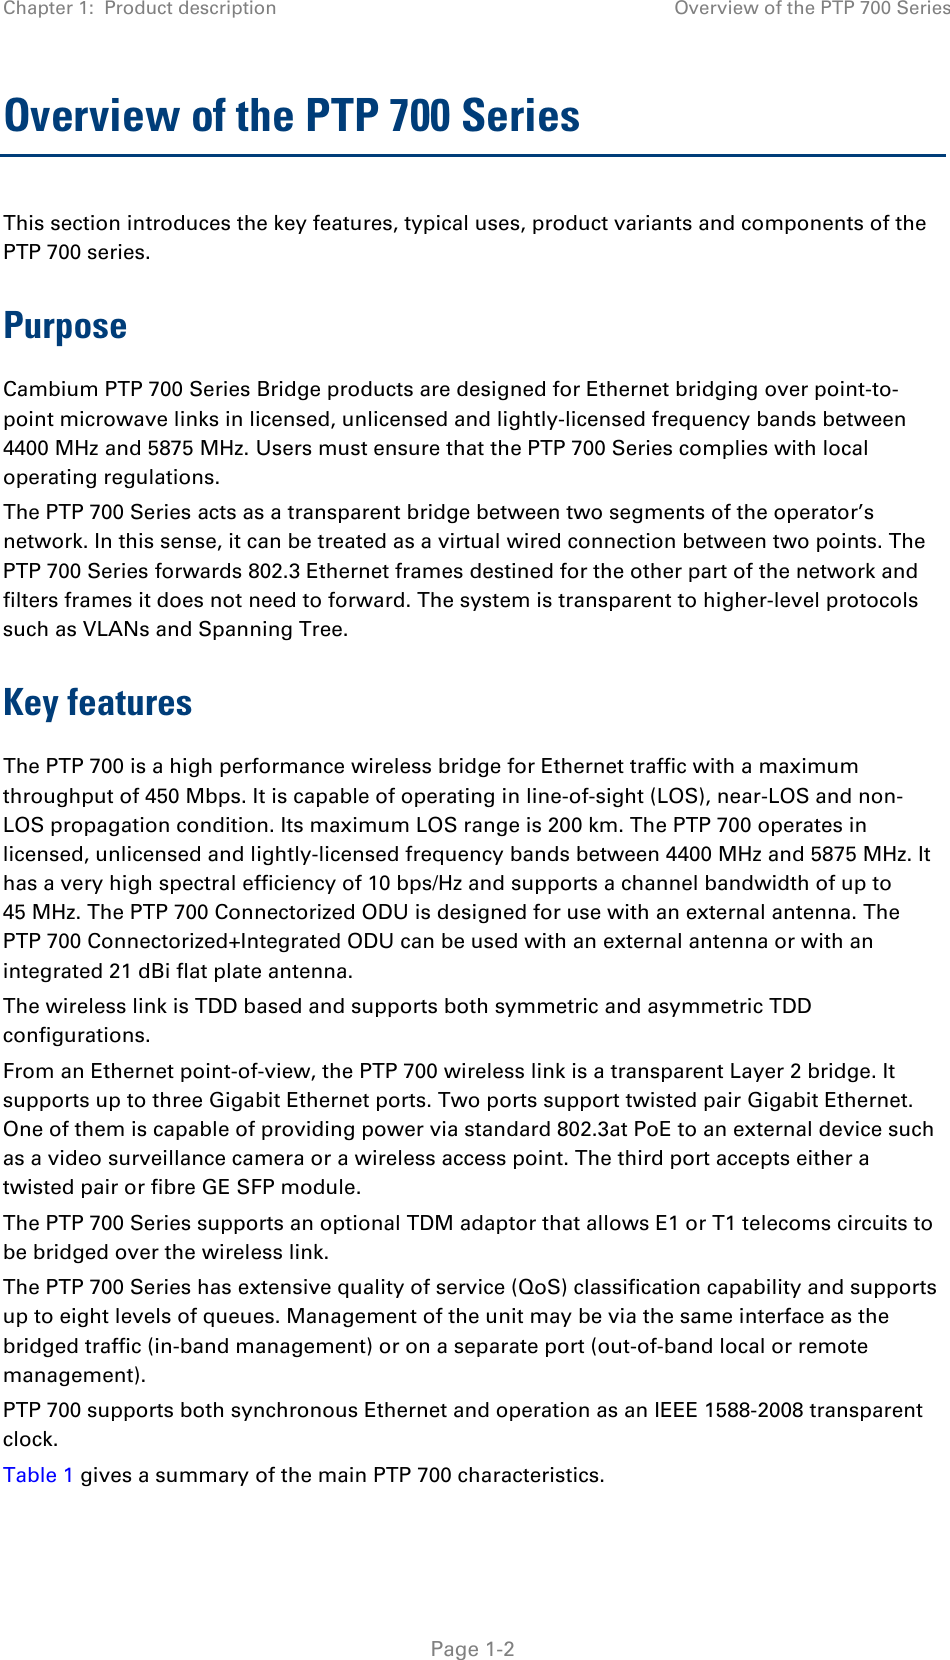 Chapter 1:  Product description Overview of the PTP 700 Series  Overview of the PTP 700 Series This section introduces the key features, typical uses, product variants and components of the PTP 700 series. Purpose Cambium PTP 700 Series Bridge products are designed for Ethernet bridging over point-to-point microwave links in licensed, unlicensed and lightly-licensed frequency bands between 4400 MHz and 5875 MHz. Users must ensure that the PTP 700 Series complies with local operating regulations. The PTP 700 Series acts as a transparent bridge between two segments of the operator’s network. In this sense, it can be treated as a virtual wired connection between two points. The PTP 700 Series forwards 802.3 Ethernet frames destined for the other part of the network and filters frames it does not need to forward. The system is transparent to higher-level protocols such as VLANs and Spanning Tree. Key features The PTP 700 is a high performance wireless bridge for Ethernet traffic with a maximum throughput of 450 Mbps. It is capable of operating in line-of-sight (LOS), near-LOS and non-LOS propagation condition. Its maximum LOS range is 200 km. The PTP 700 operates in licensed, unlicensed and lightly-licensed frequency bands between 4400 MHz and 5875 MHz. It has a very high spectral efficiency of 10 bps/Hz and supports a channel bandwidth of up to 45 MHz. The PTP 700 Connectorized ODU is designed for use with an external antenna. The PTP 700 Connectorized+Integrated ODU can be used with an external antenna or with an integrated 21 dBi flat plate antenna. The wireless link is TDD based and supports both symmetric and asymmetric TDD configurations. From an Ethernet point-of-view, the PTP 700 wireless link is a transparent Layer 2 bridge. It supports up to three Gigabit Ethernet ports. Two ports support twisted pair Gigabit Ethernet. One of them is capable of providing power via standard 802.3at PoE to an external device such as a video surveillance camera or a wireless access point. The third port accepts either a twisted pair or fibre GE SFP module. The PTP 700 Series supports an optional TDM adaptor that allows E1 or T1 telecoms circuits to be bridged over the wireless link.  The PTP 700 Series has extensive quality of service (QoS) classification capability and supports up to eight levels of queues. Management of the unit may be via the same interface as the bridged traffic (in-band management) or on a separate port (out-of-band local or remote management). PTP 700 supports both synchronous Ethernet and operation as an IEEE 1588-2008 transparent clock. Table 1 gives a summary of the main PTP 700 characteristics.   Page 1-2 